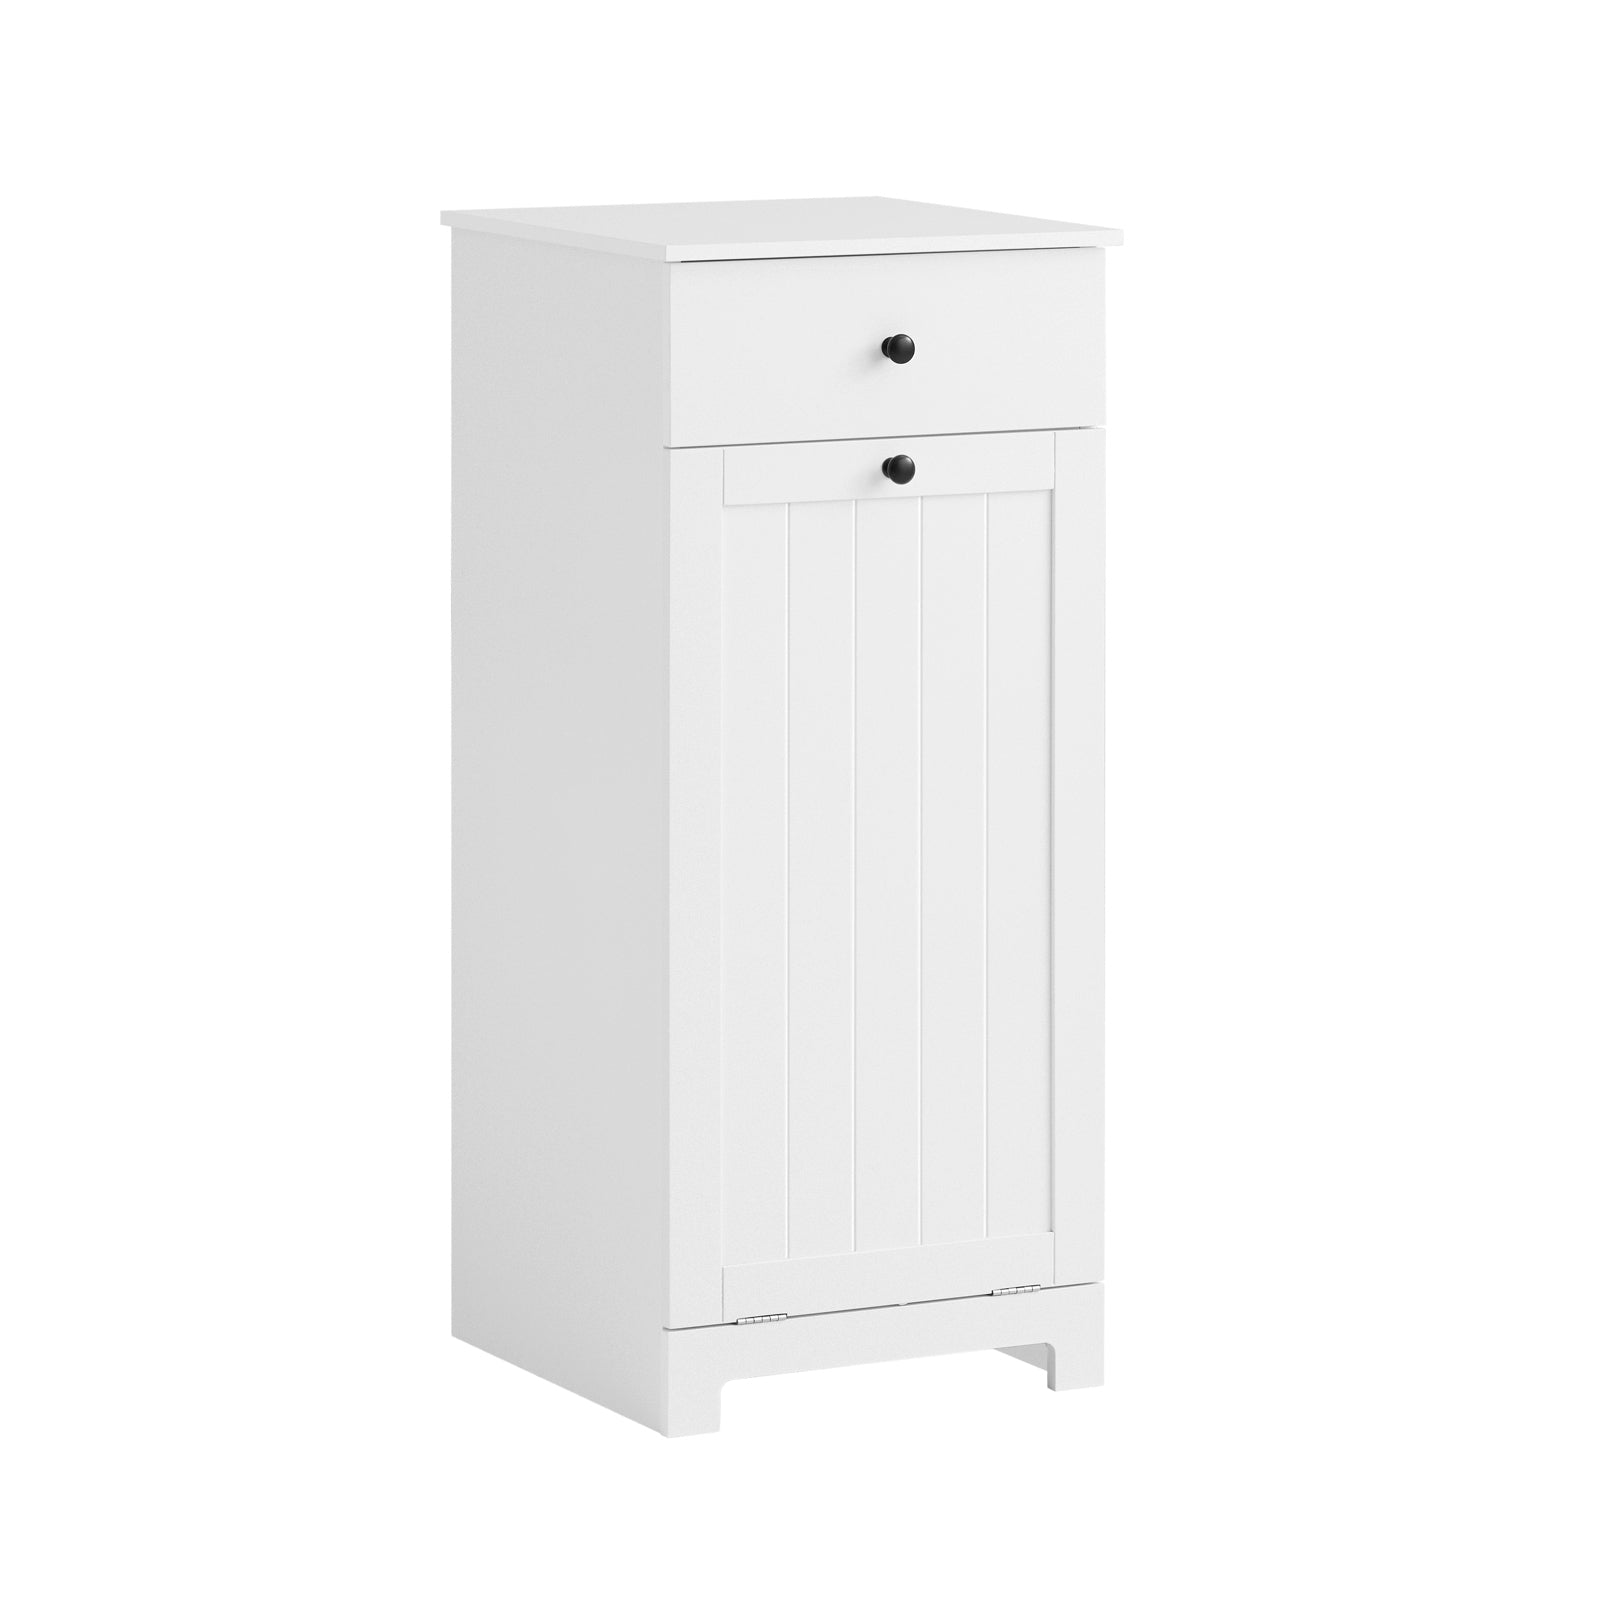 Small White Laundry Room Storage Cabinet — Rickle.